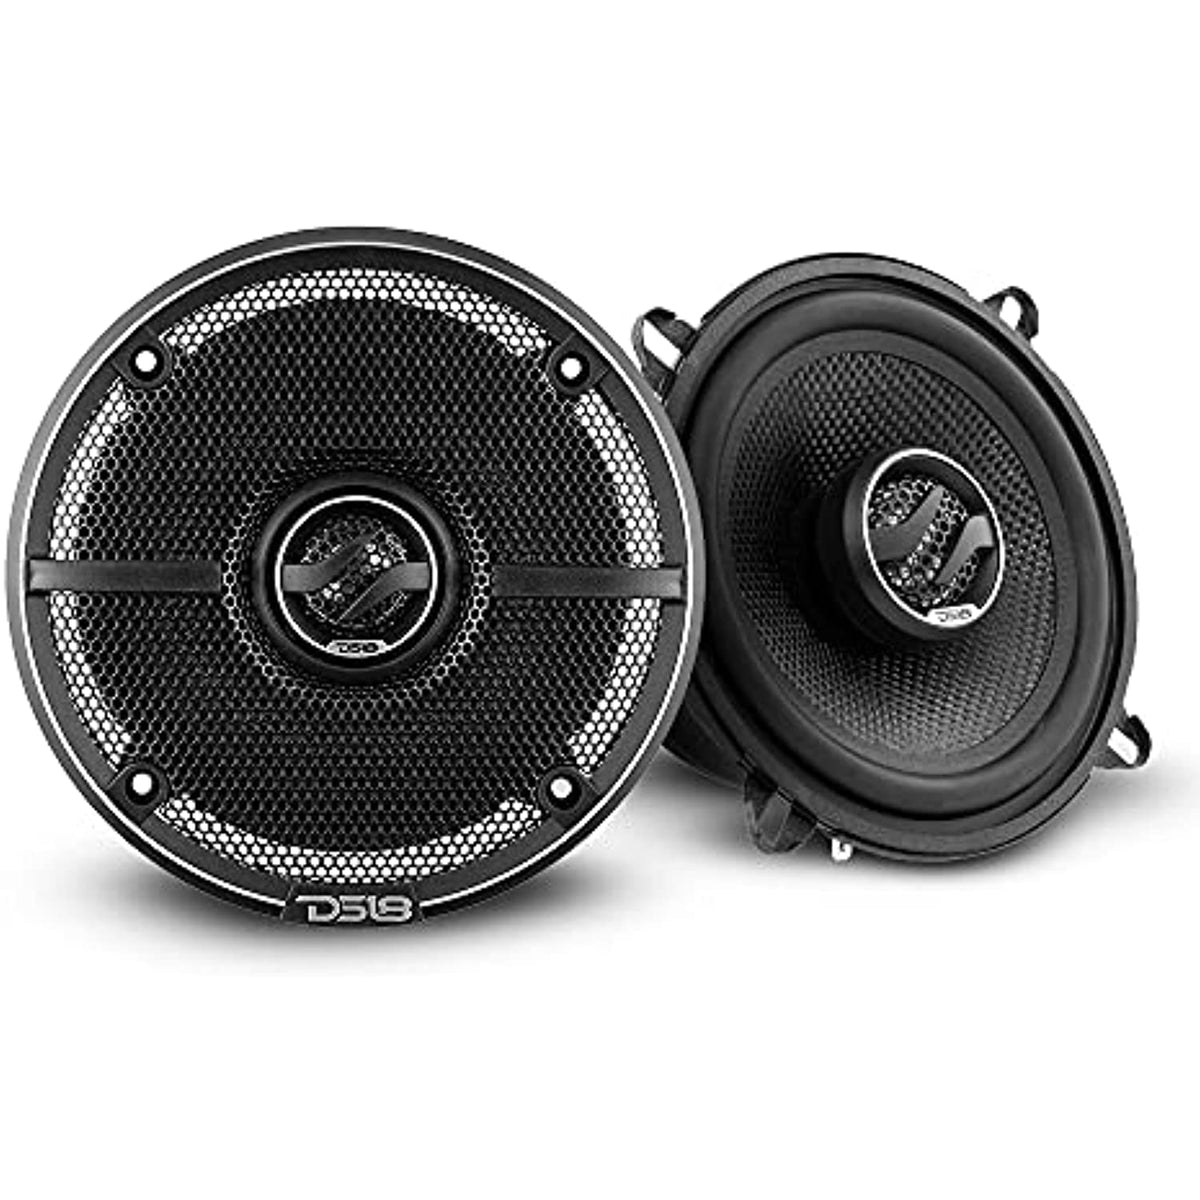 DS18 ZXI-5254 5.25" Car Audio Coaxial Speaker with Built in Neodymium Tweeter and Kevlar Cone – 2 Way 180 Watts Max 4 Ohm (2 Speakers)